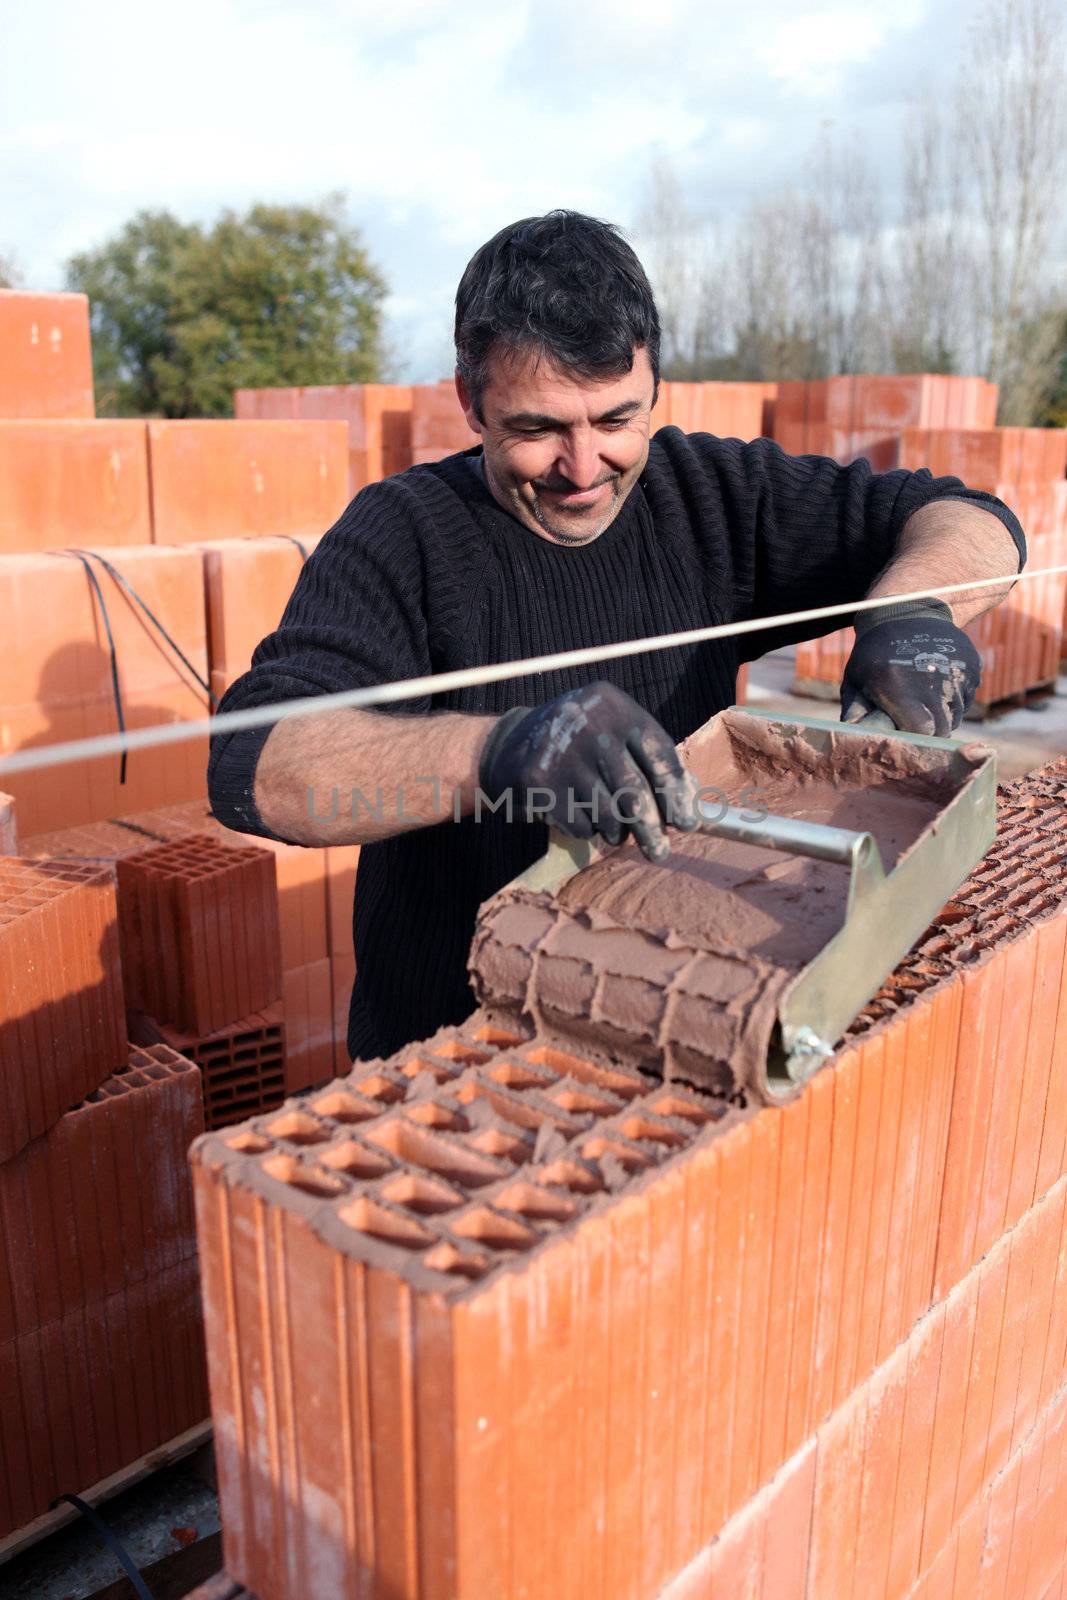 Portrait of a bricklayer by phovoir